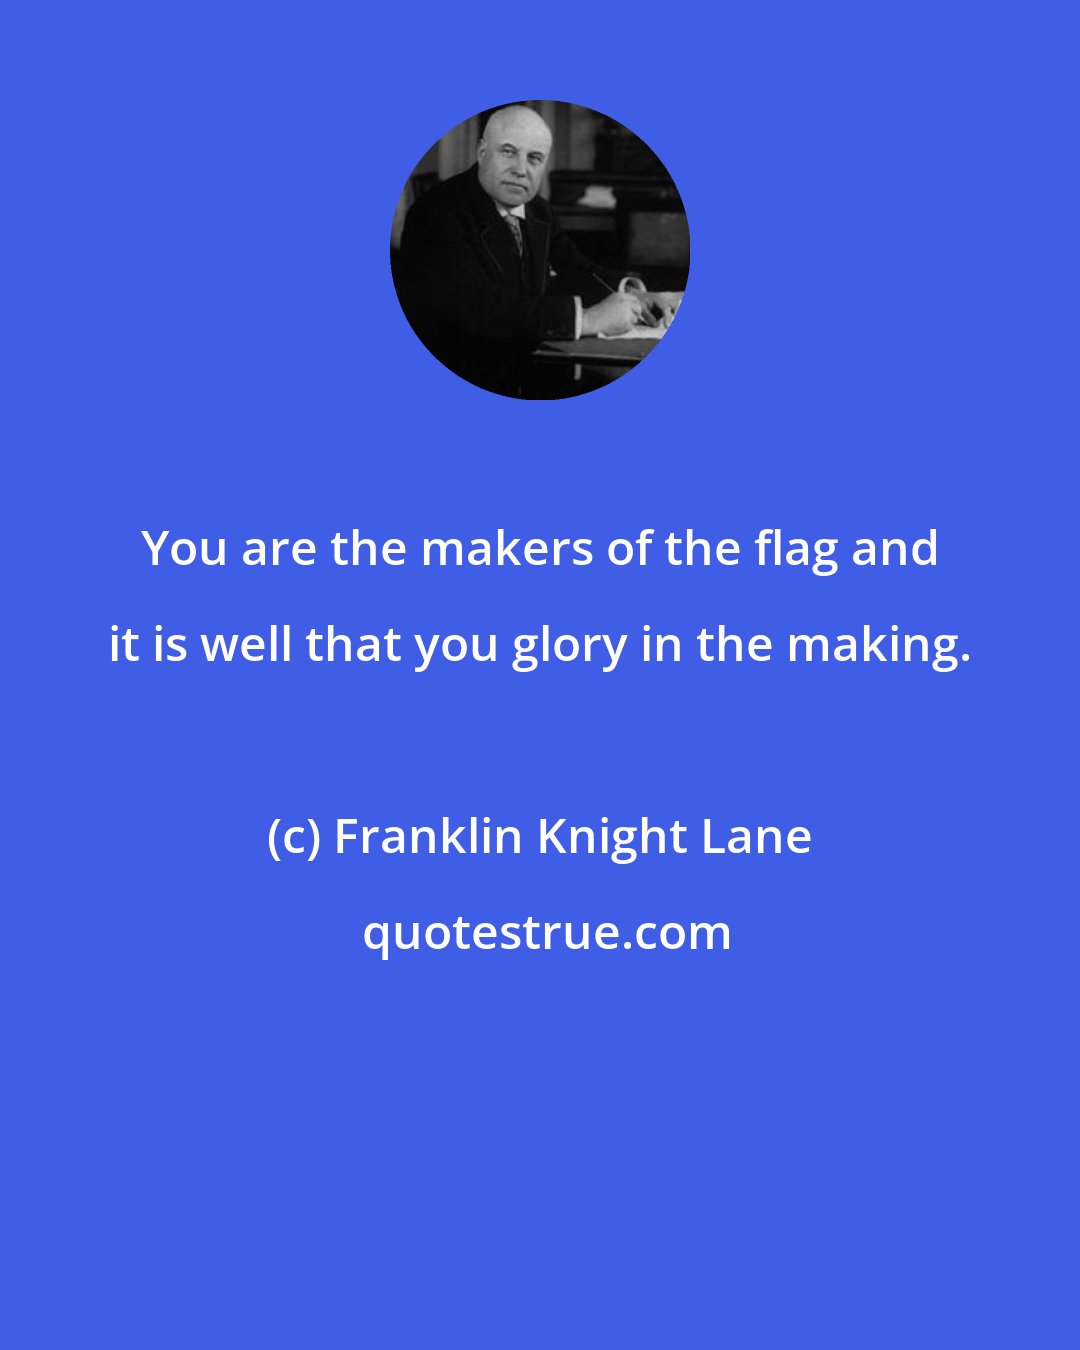 Franklin Knight Lane: You are the makers of the flag and it is well that you glory in the making.